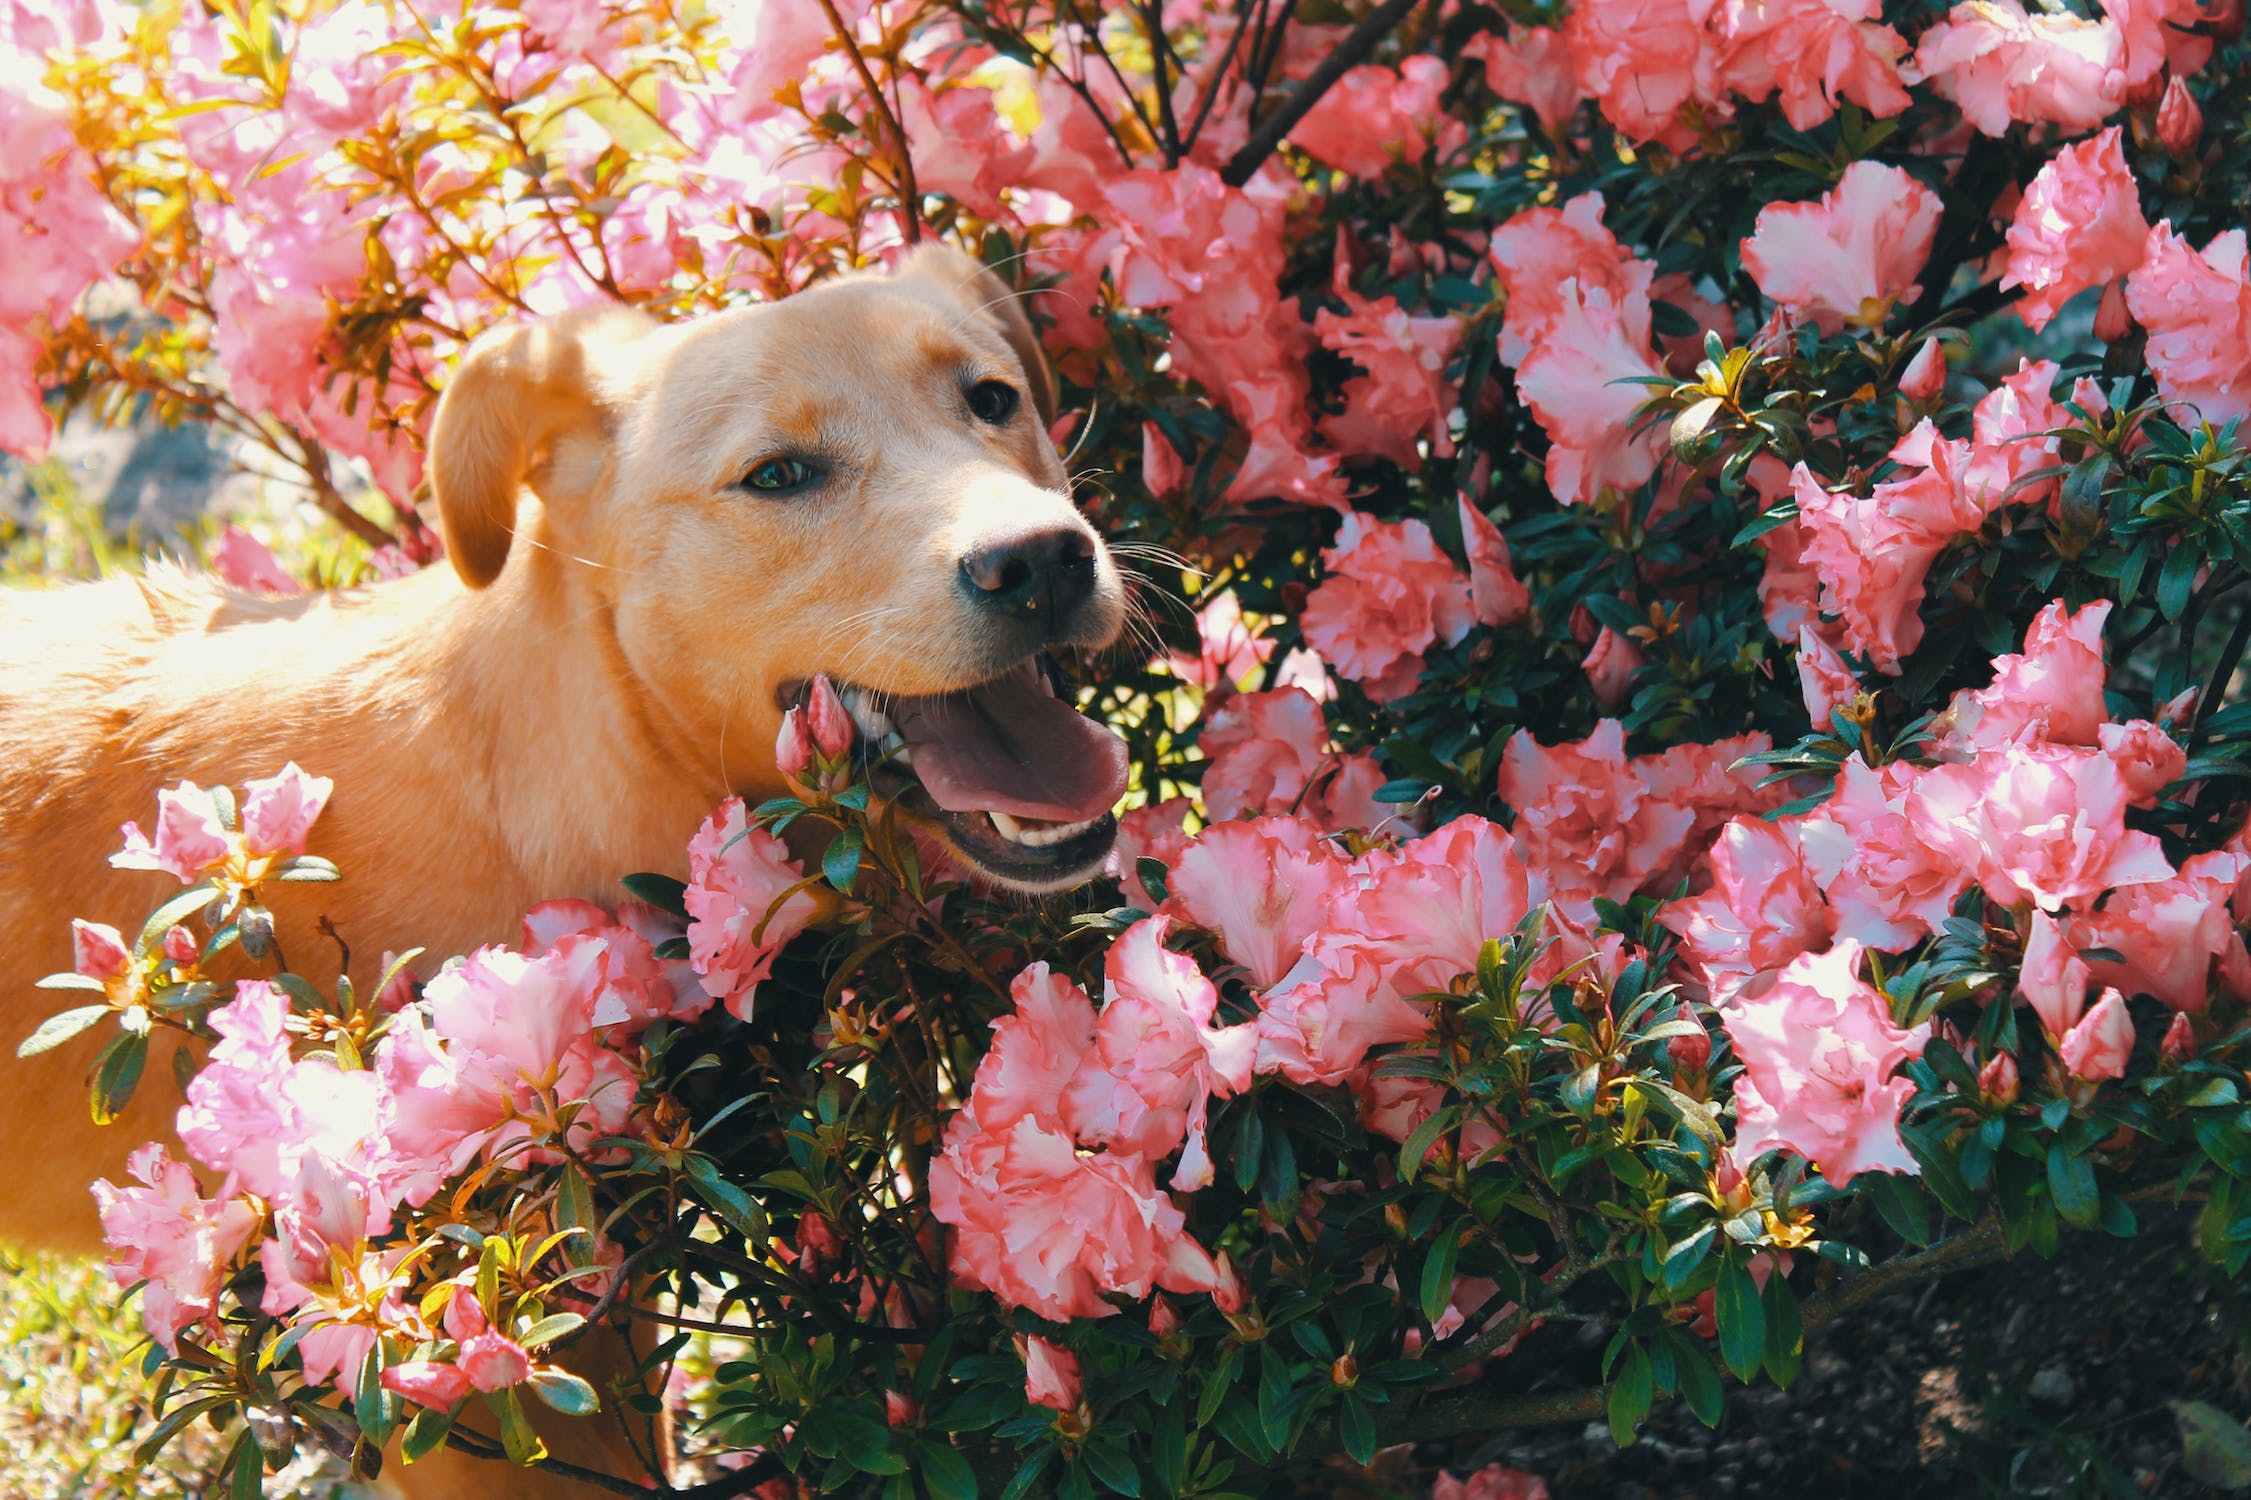 Dog in a garden, Dog with flowers